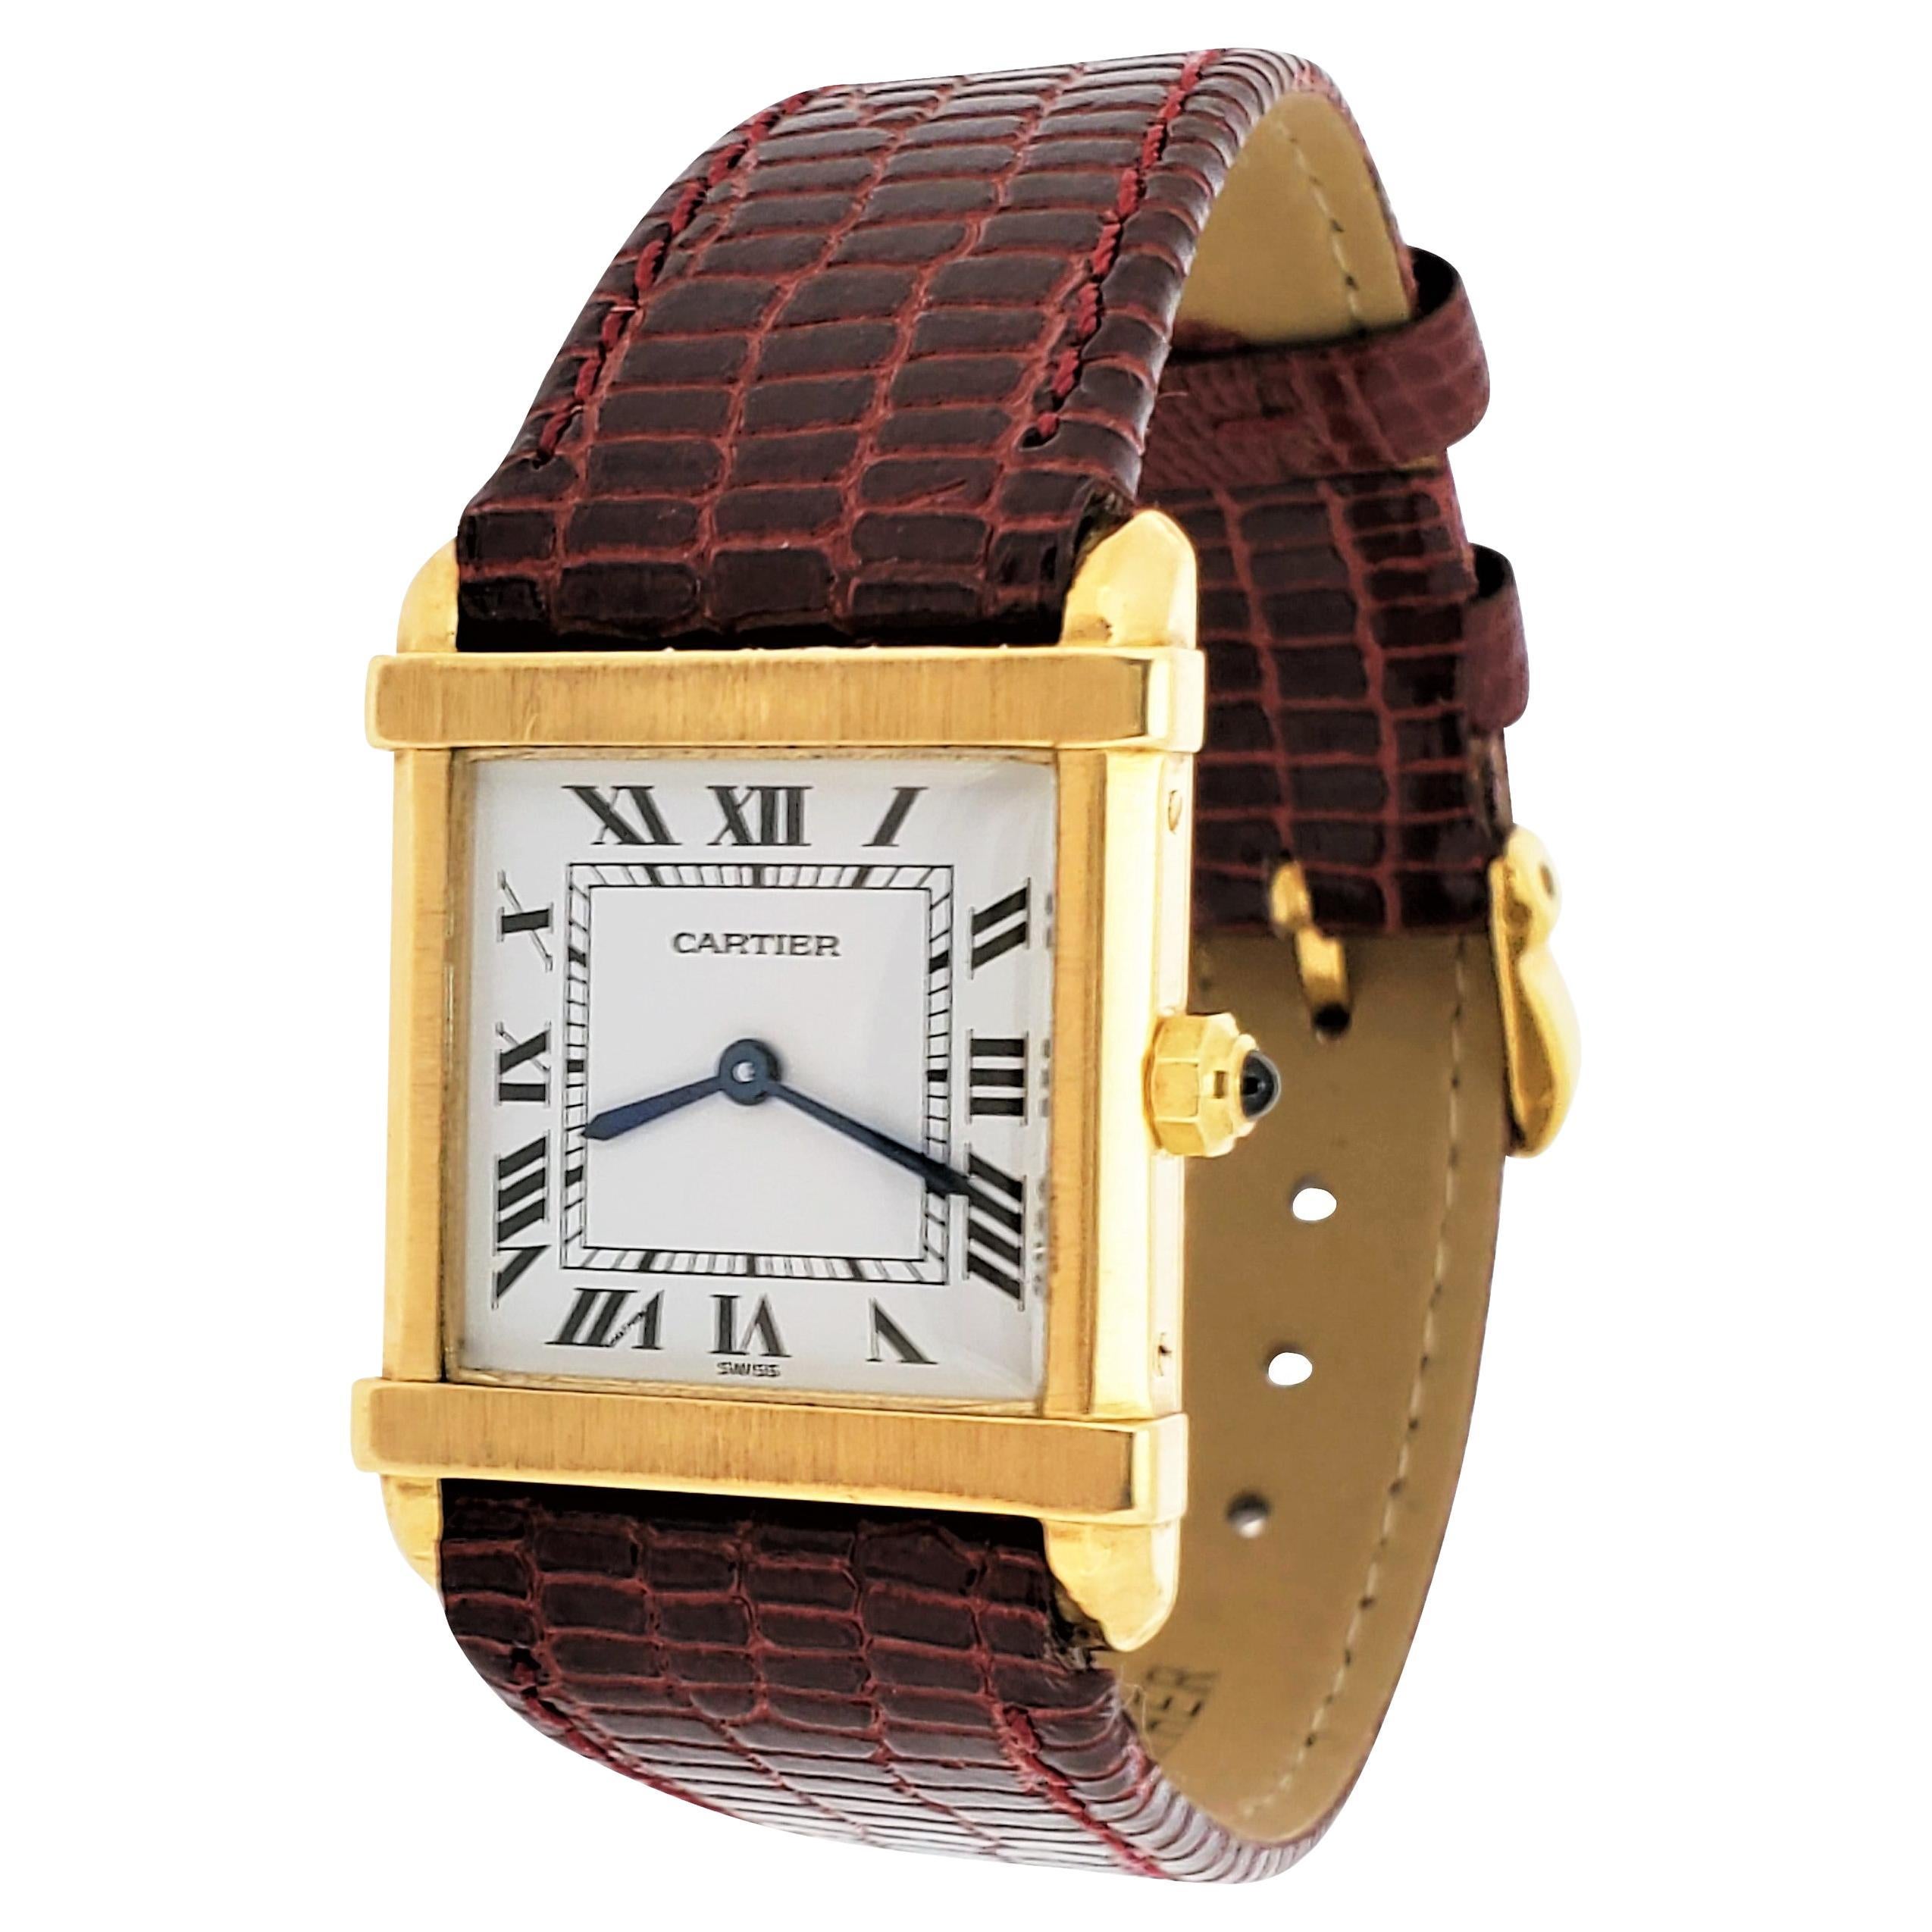 Cartier Tank Chinois 'Chinese Tank' Made in 18K Gold, circa 1980's